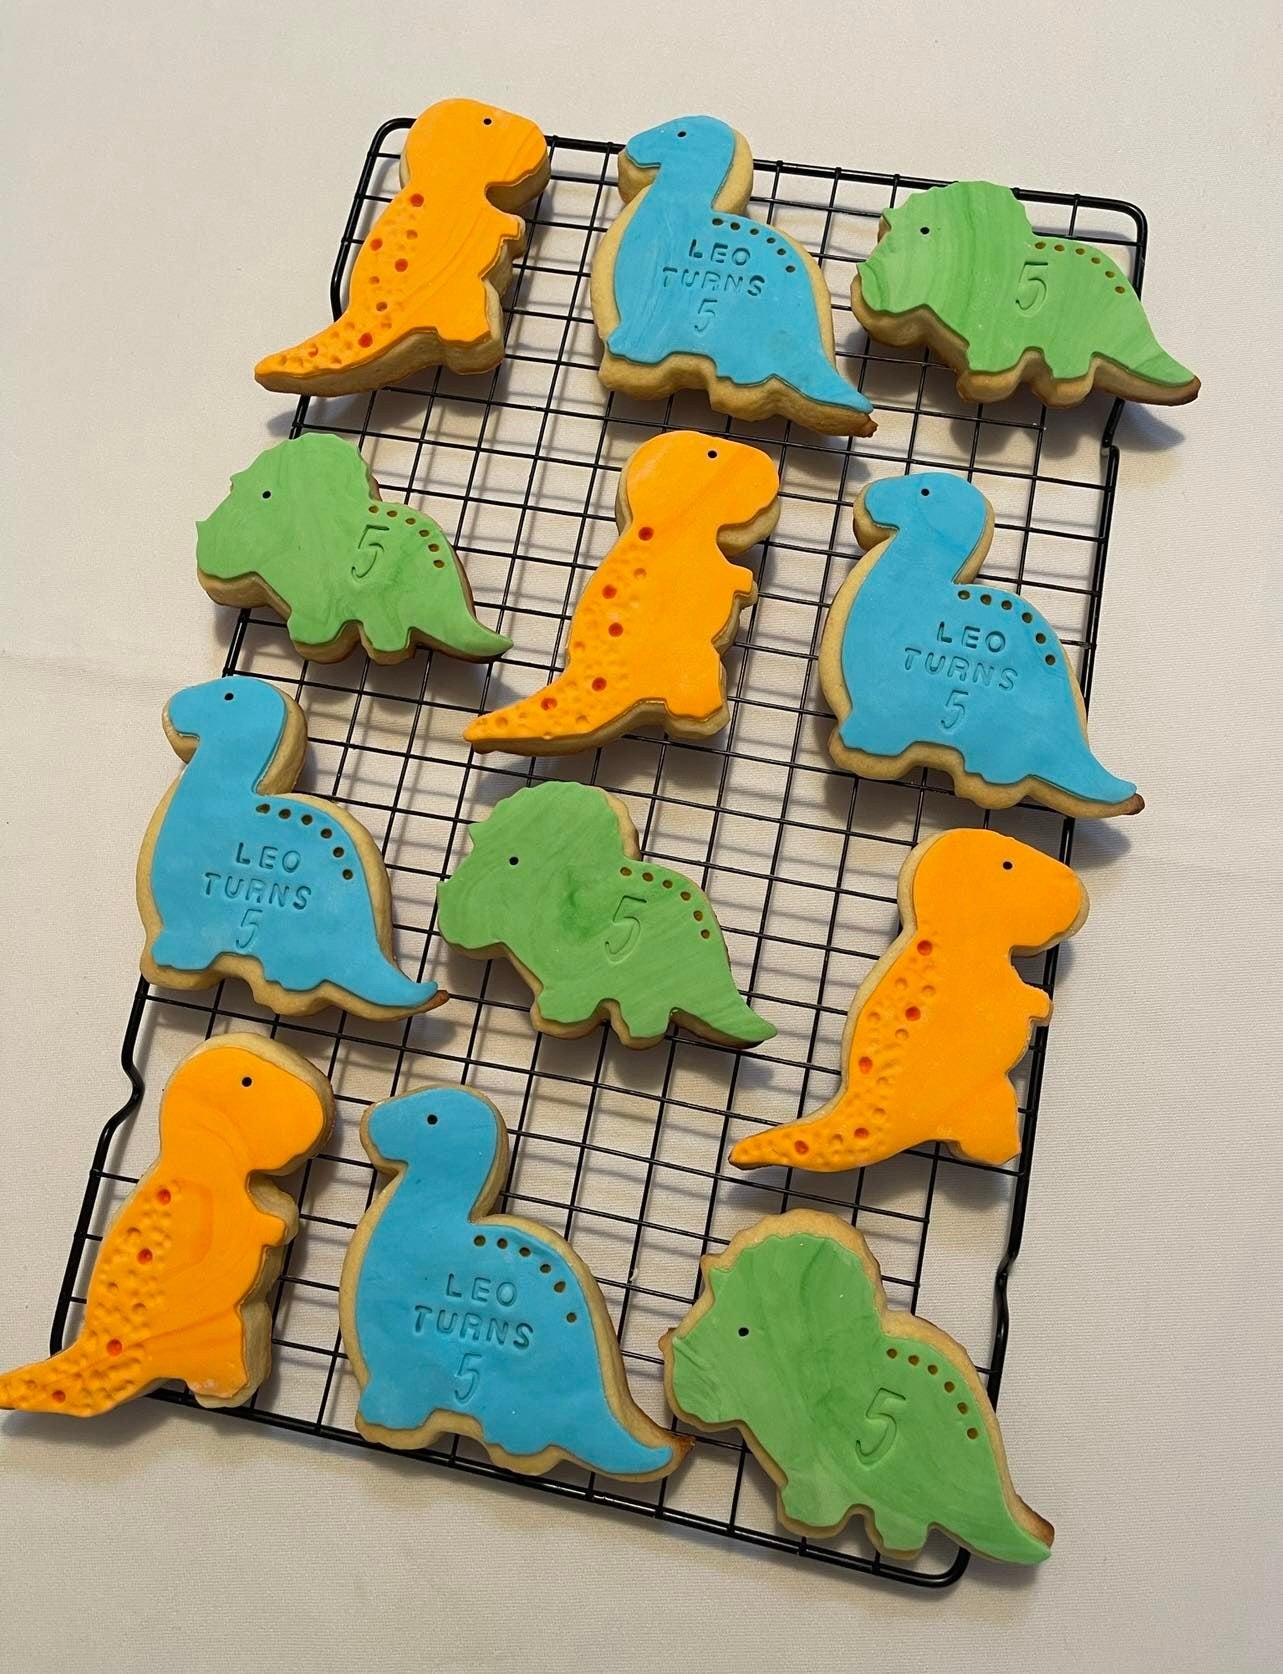 CUSTOM COOKIES  - Quotes will be given.